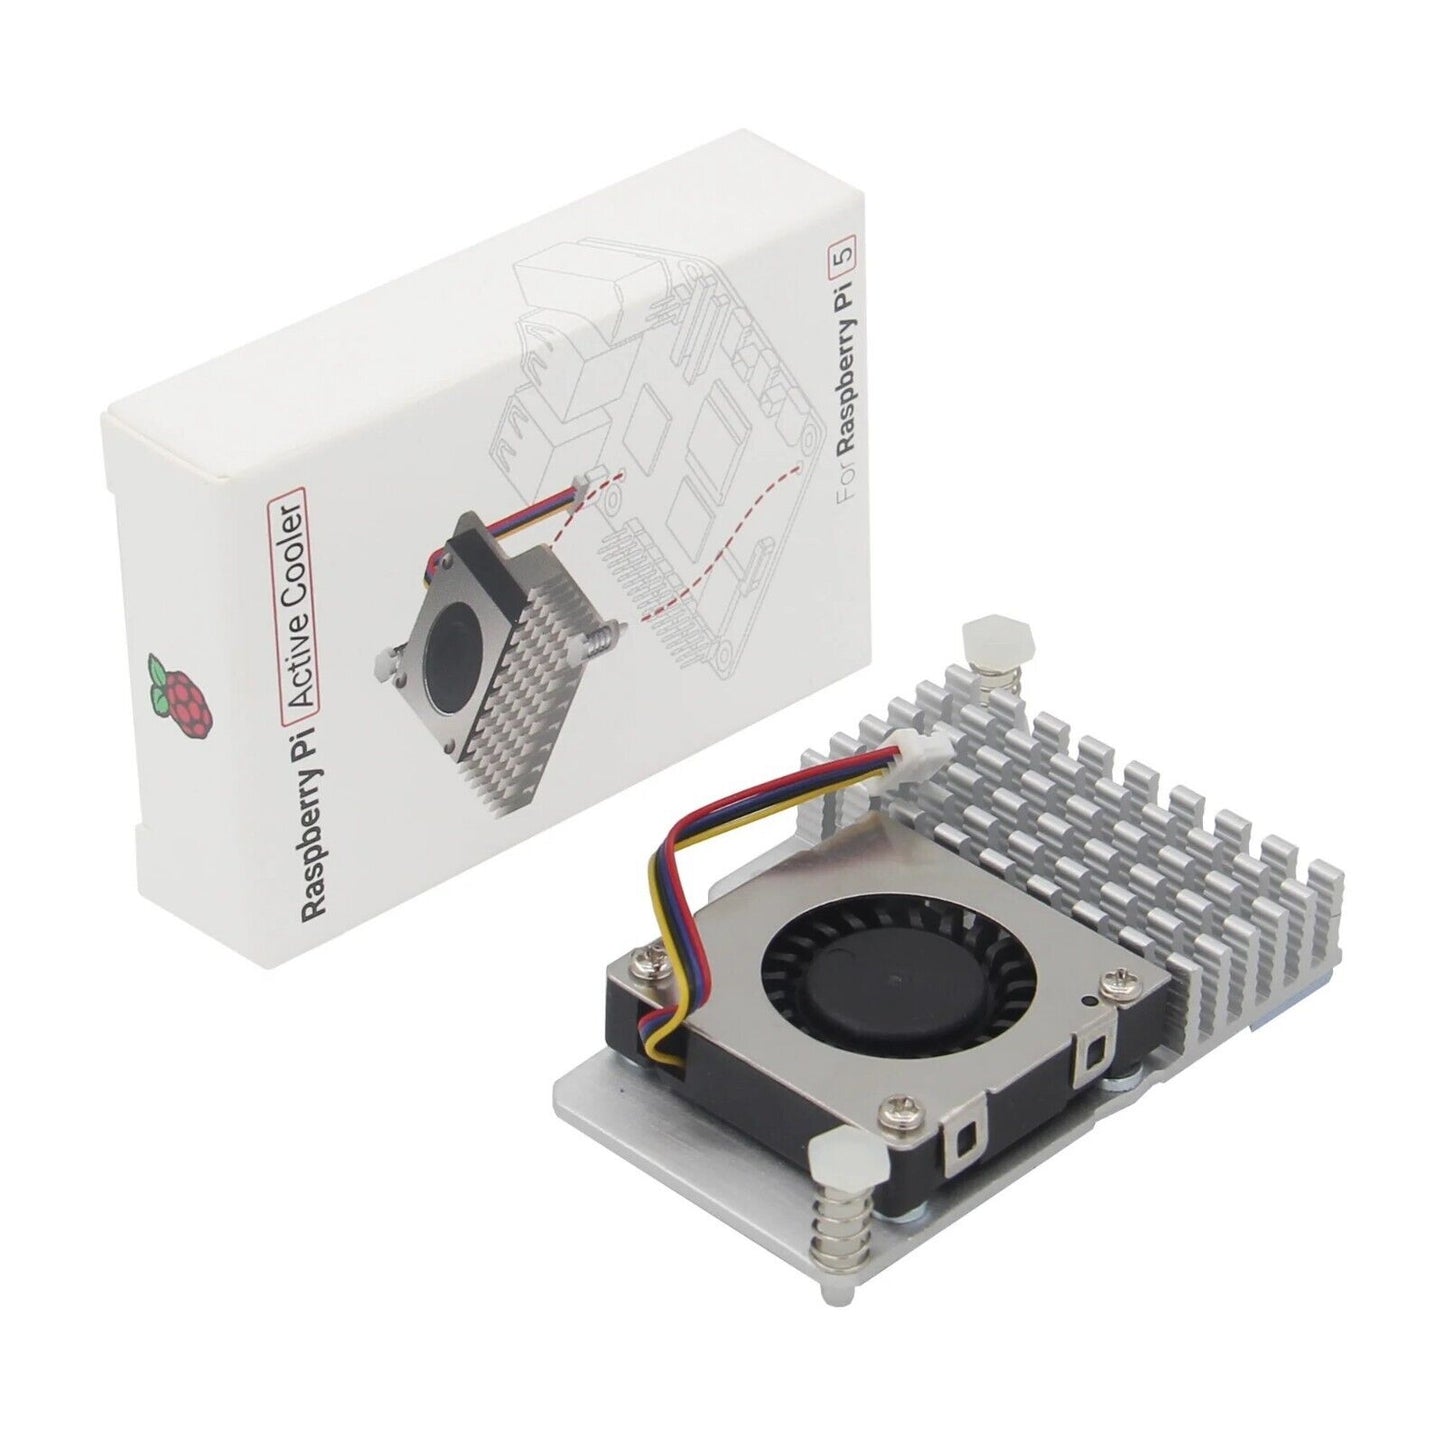 Official Raspberry Pi Active Cooler for Raspberry Pi 5, Temperature-controlled